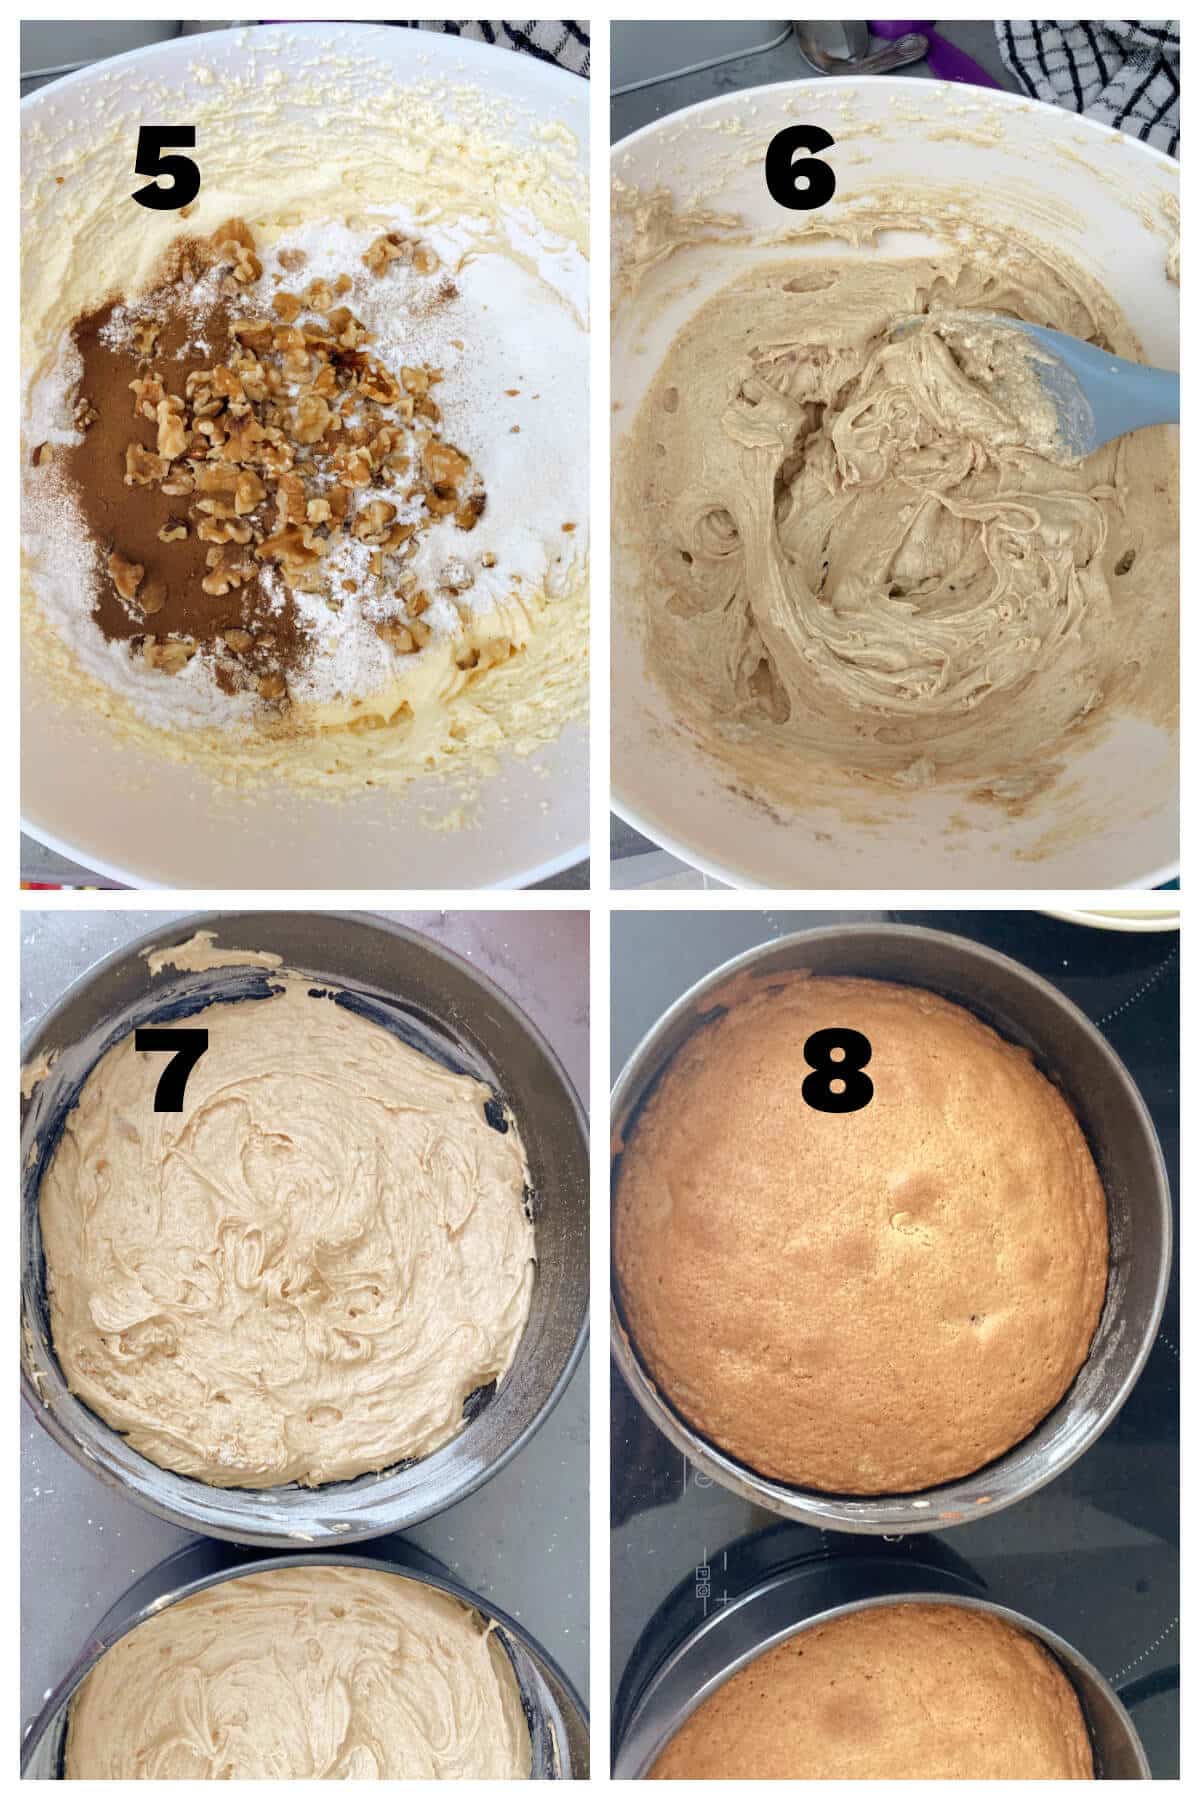 Collage of 4 photos to show how to make coffee and walnut sponge.